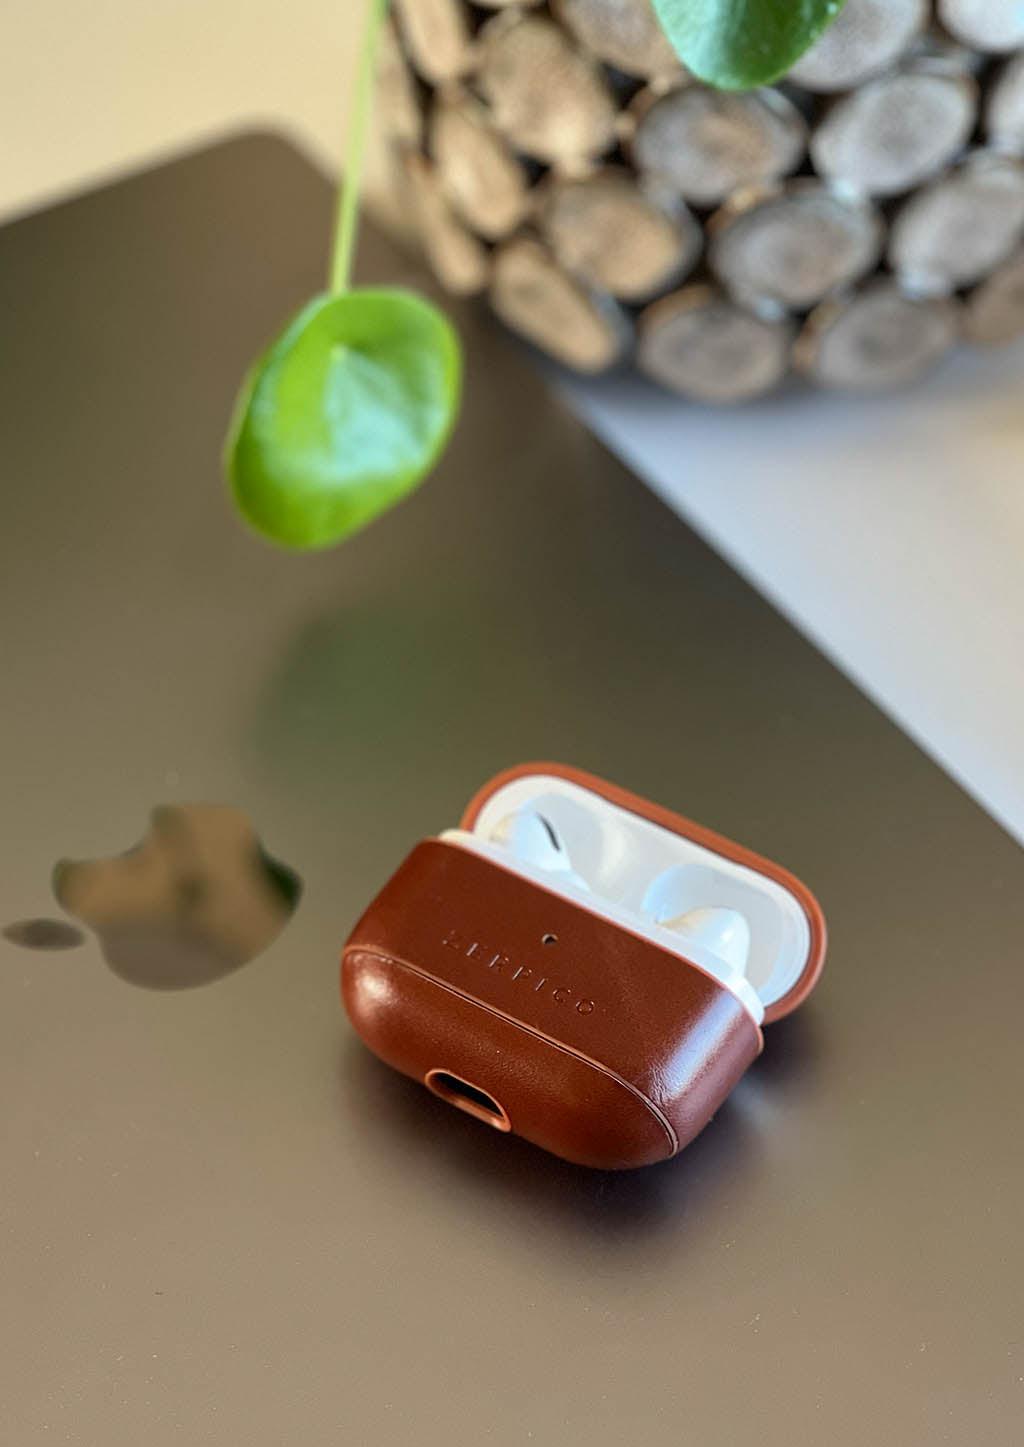 Zerpico Leather Airpods case. Our case open on a Macbook pro.